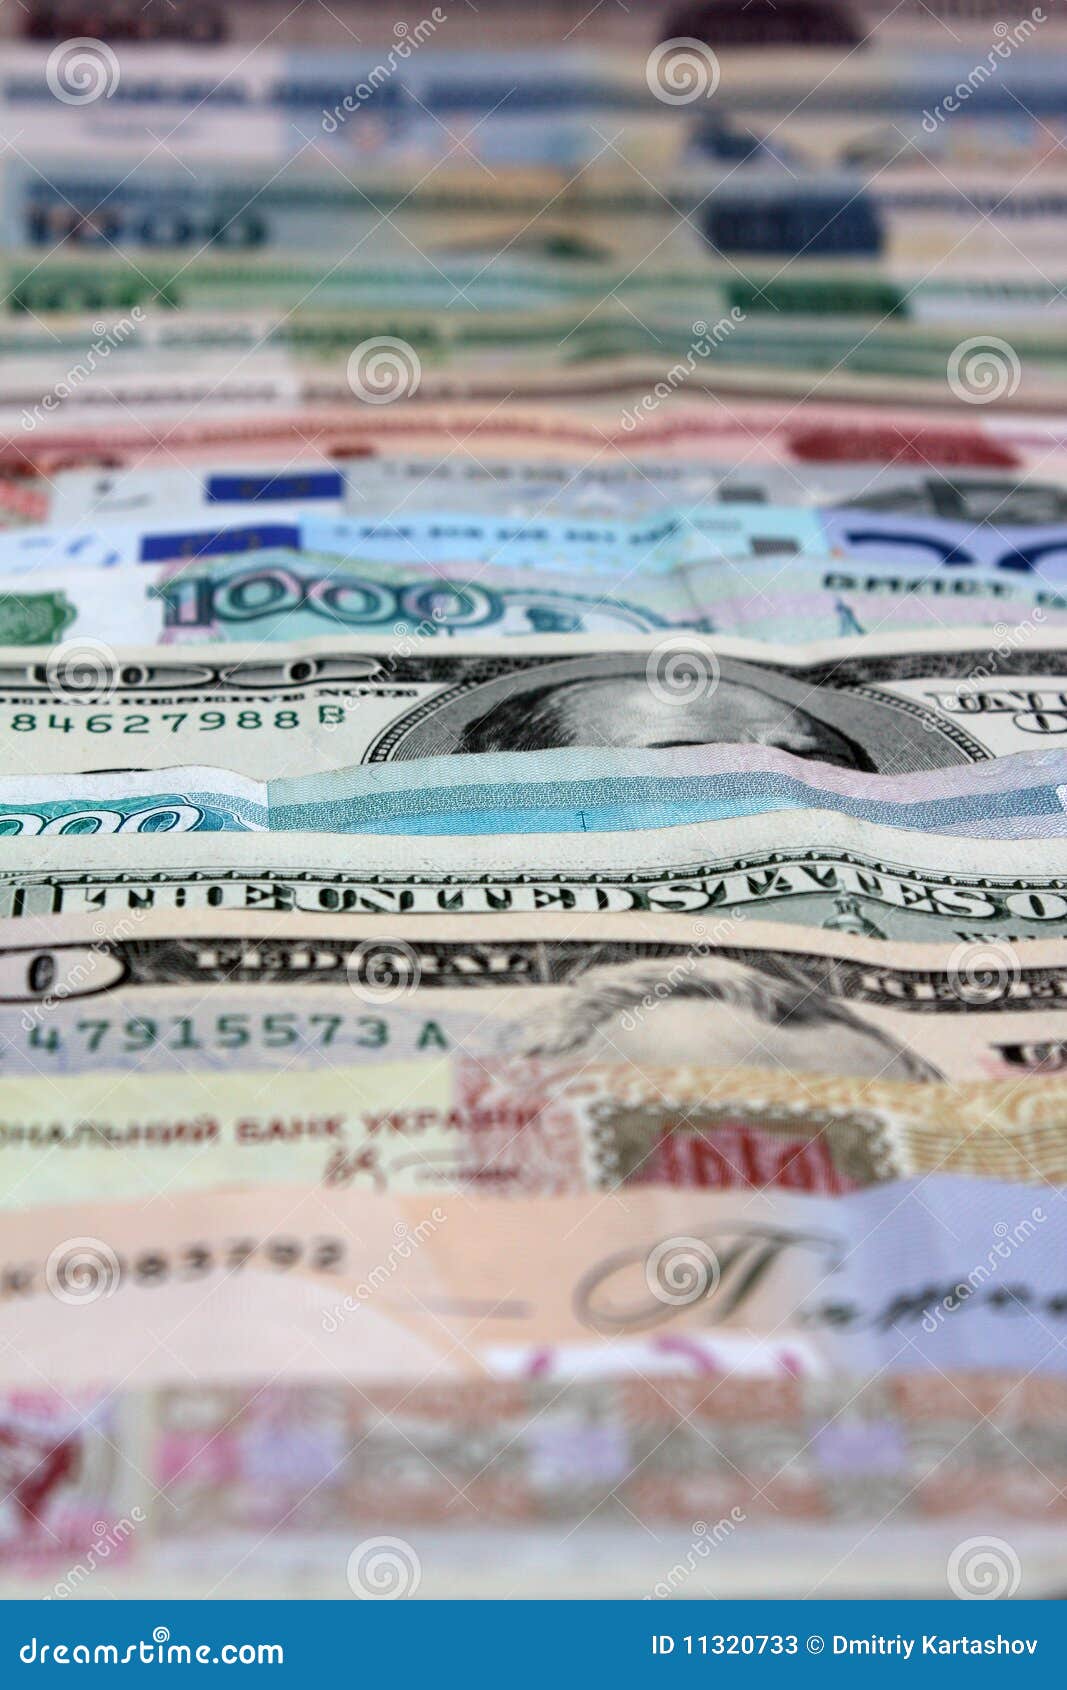 money, various currencies as a background